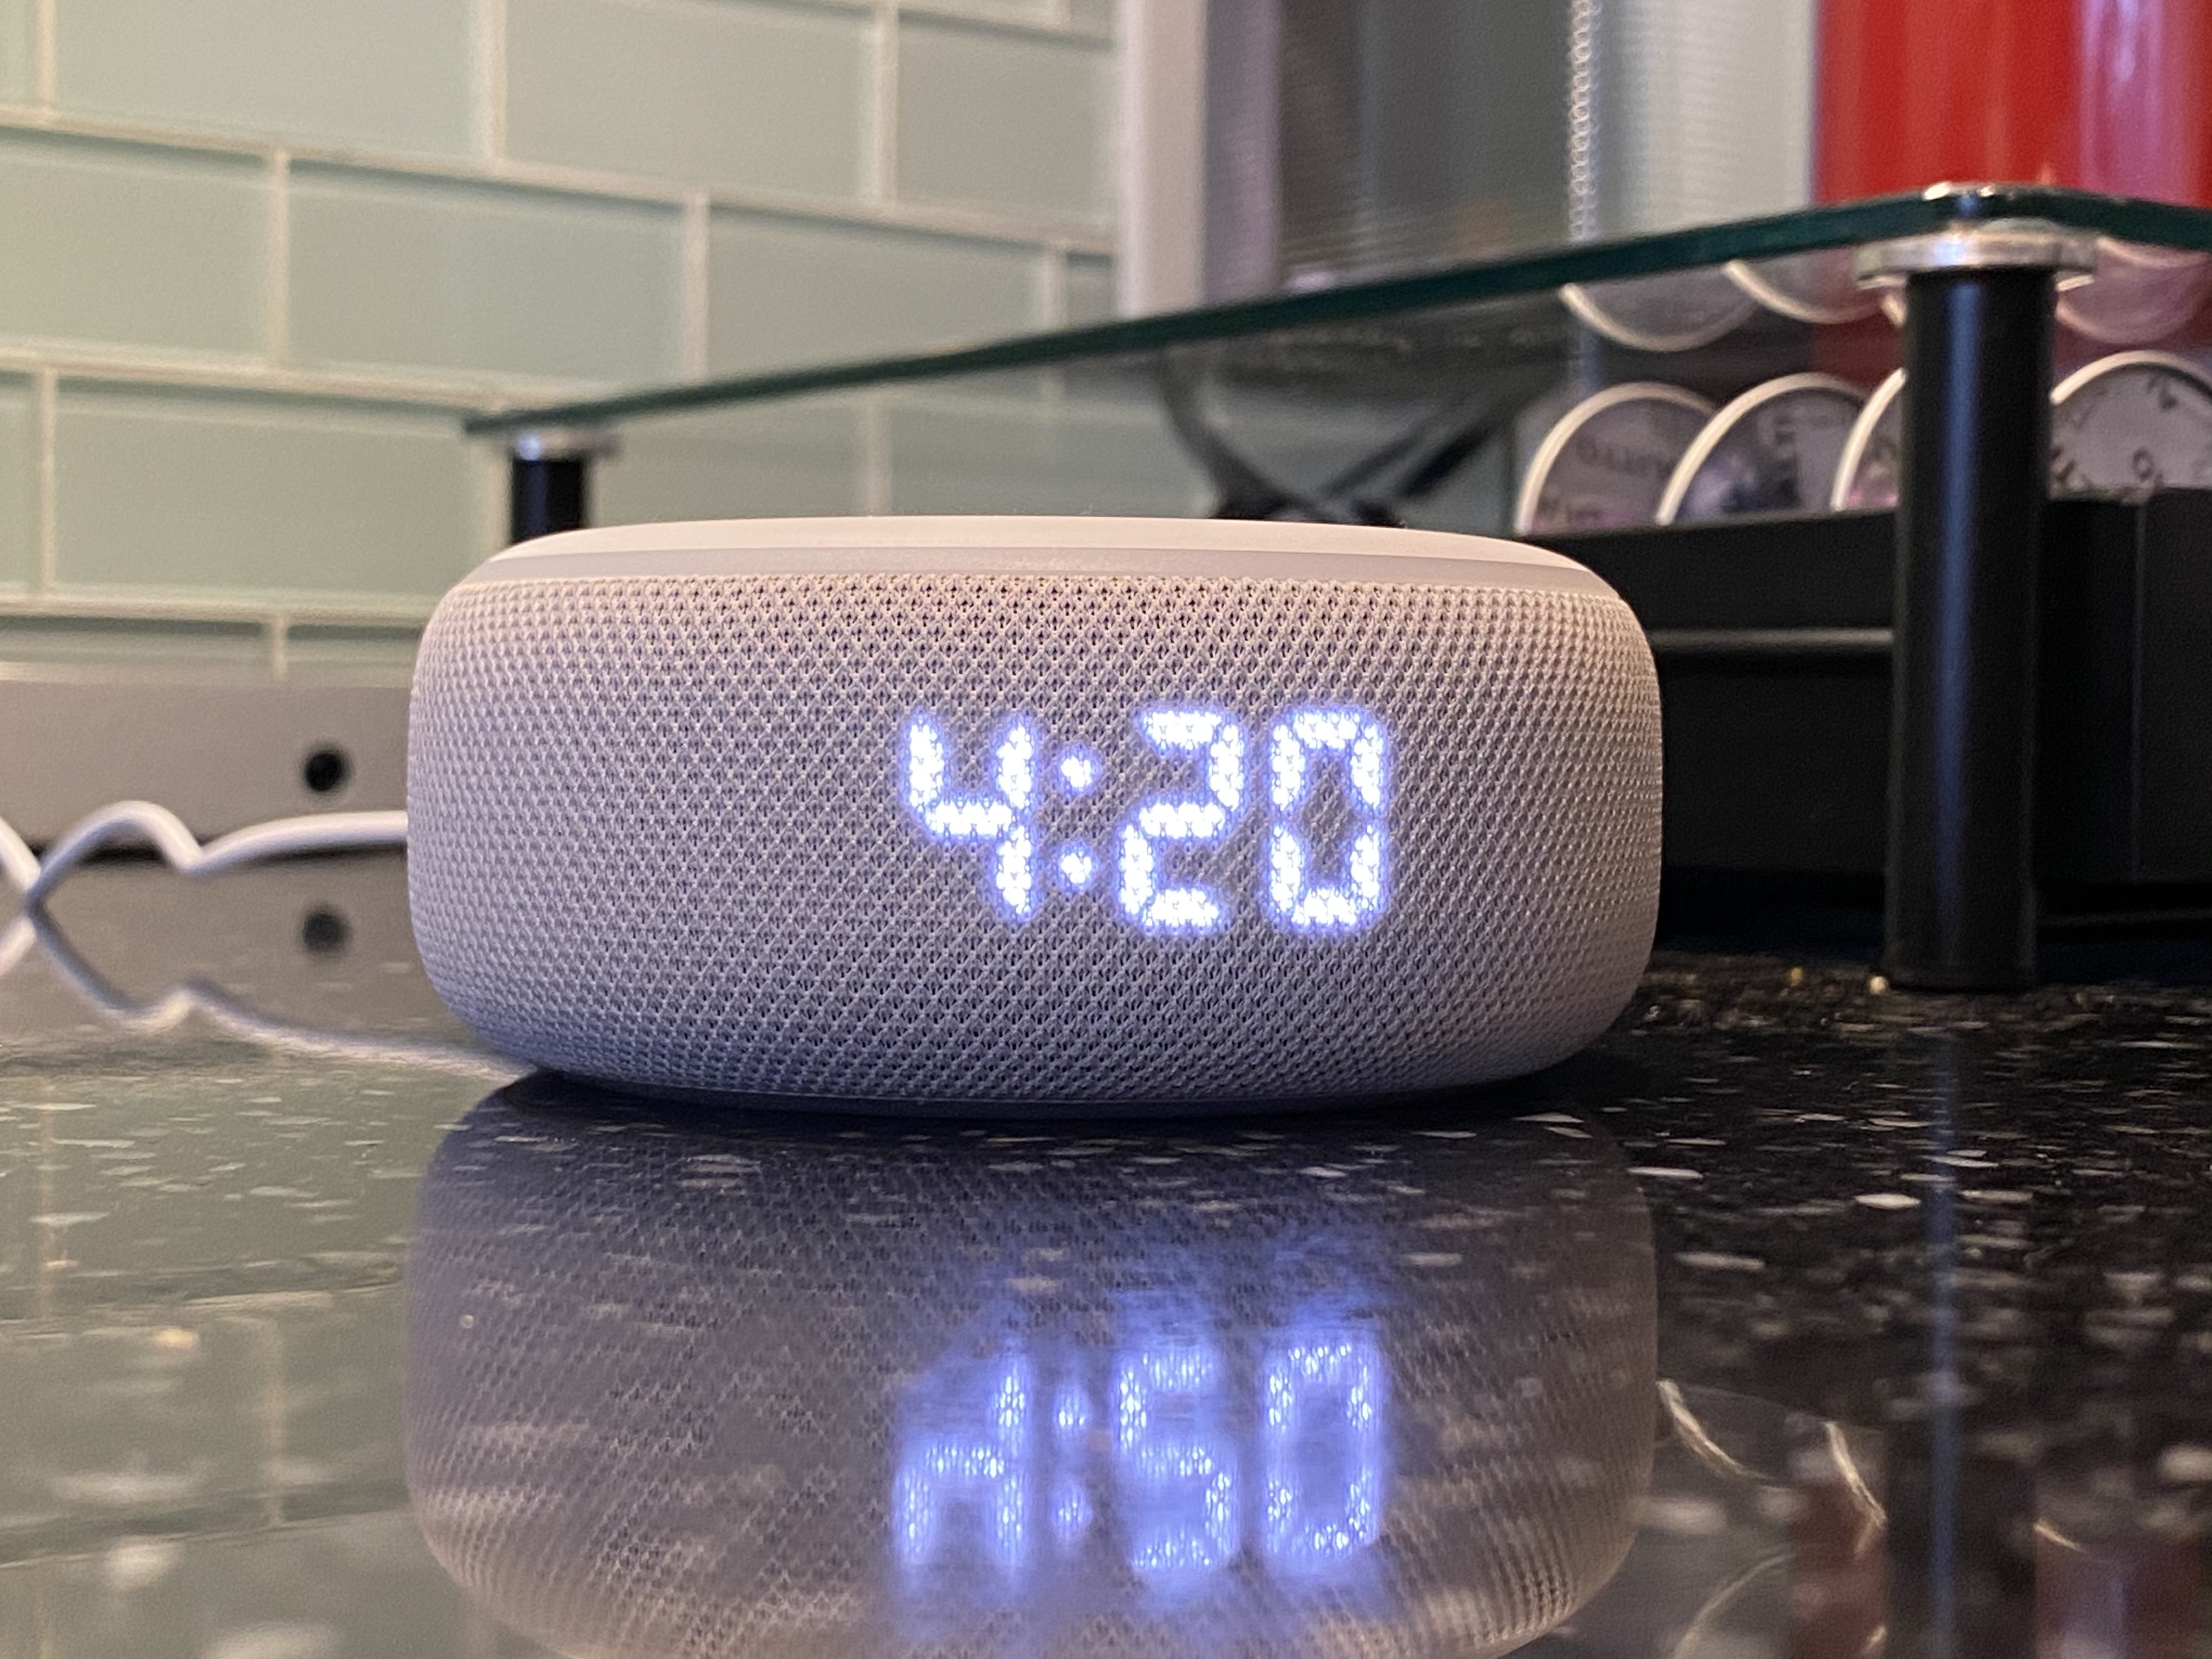 echo dot with clock